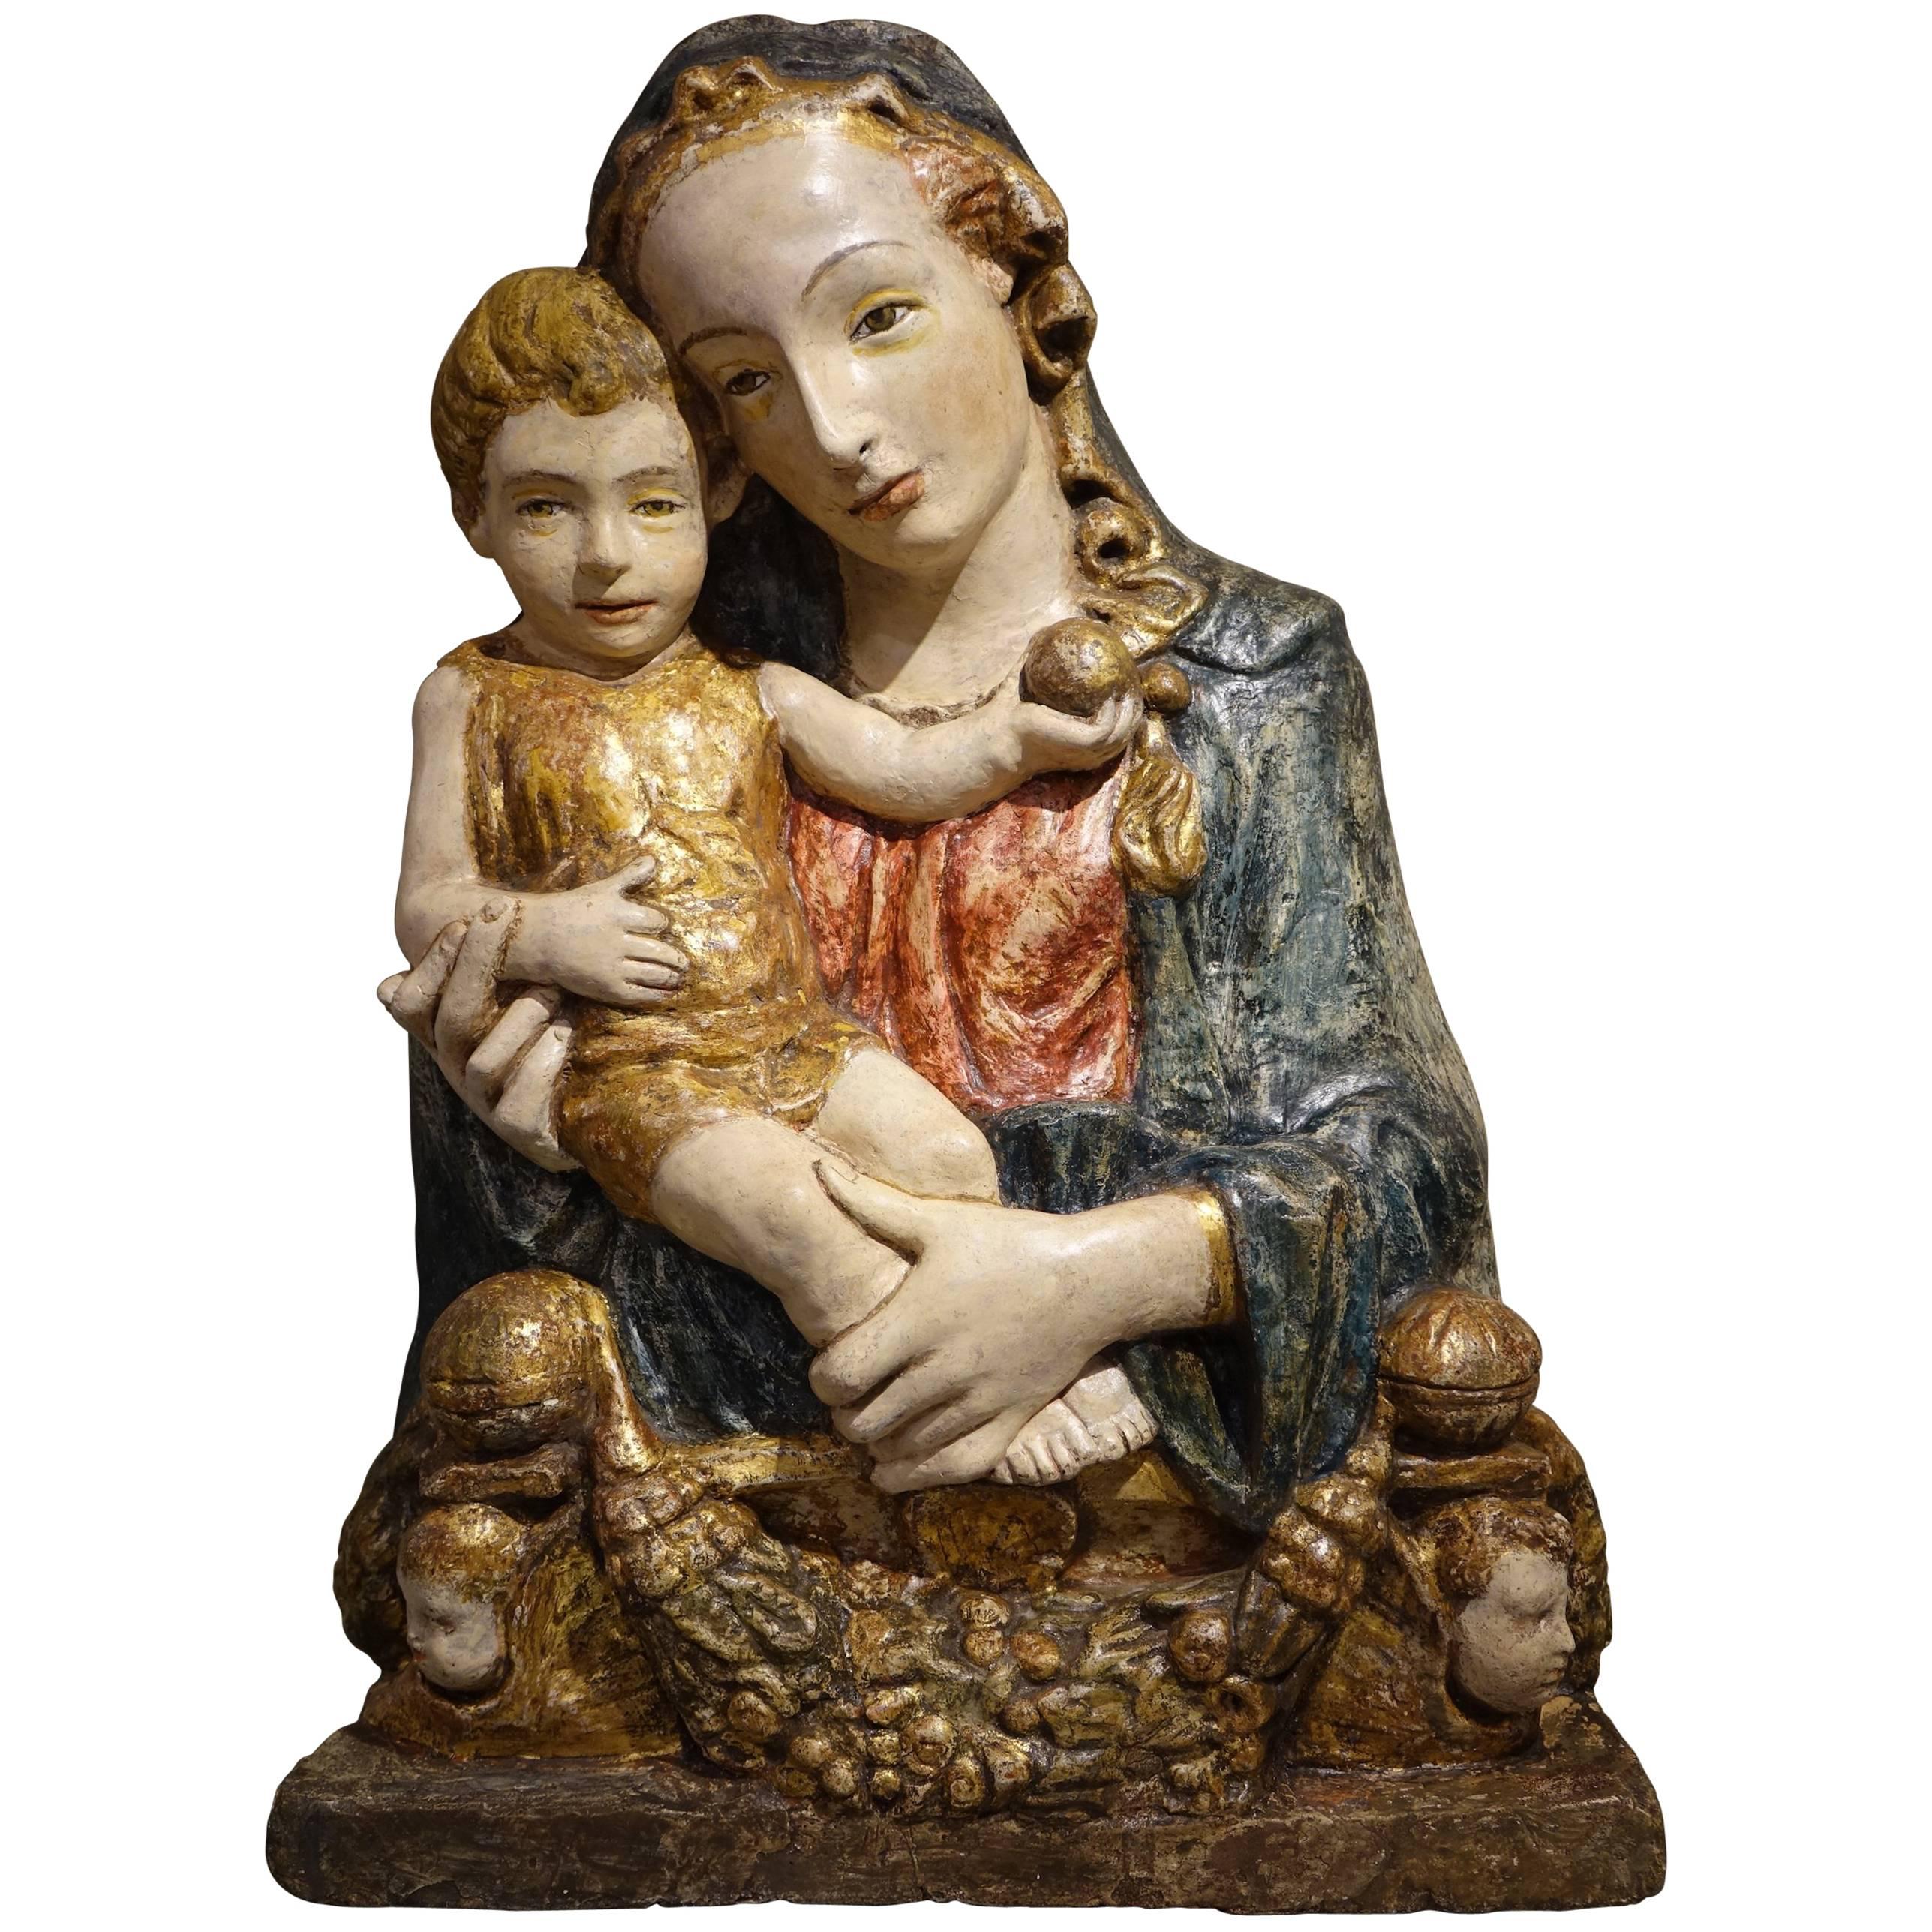 15th Century Polychrome and Parcel-Gilt Stucco Sculpture of Madonna and Child